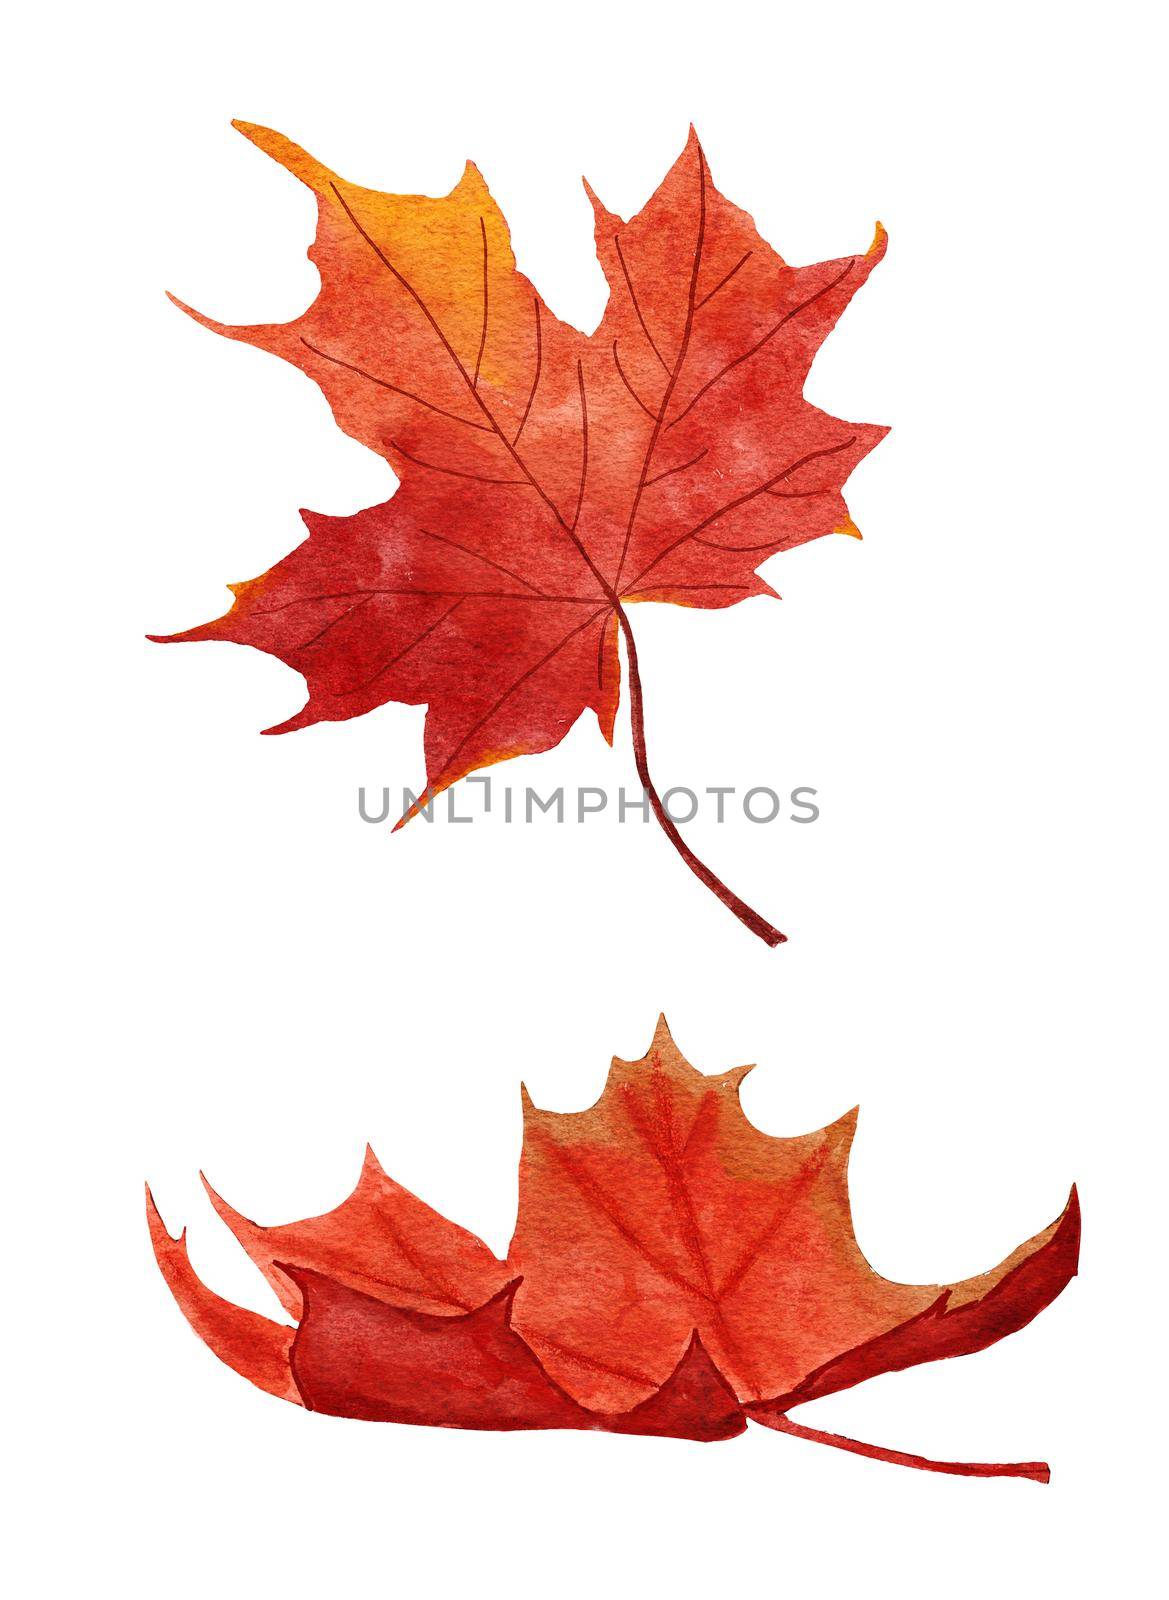 Watercolor hand drawn illustration of red maple leaves. Autumn fall leaf from tree. Forest wood woodland, Canadian nature concept